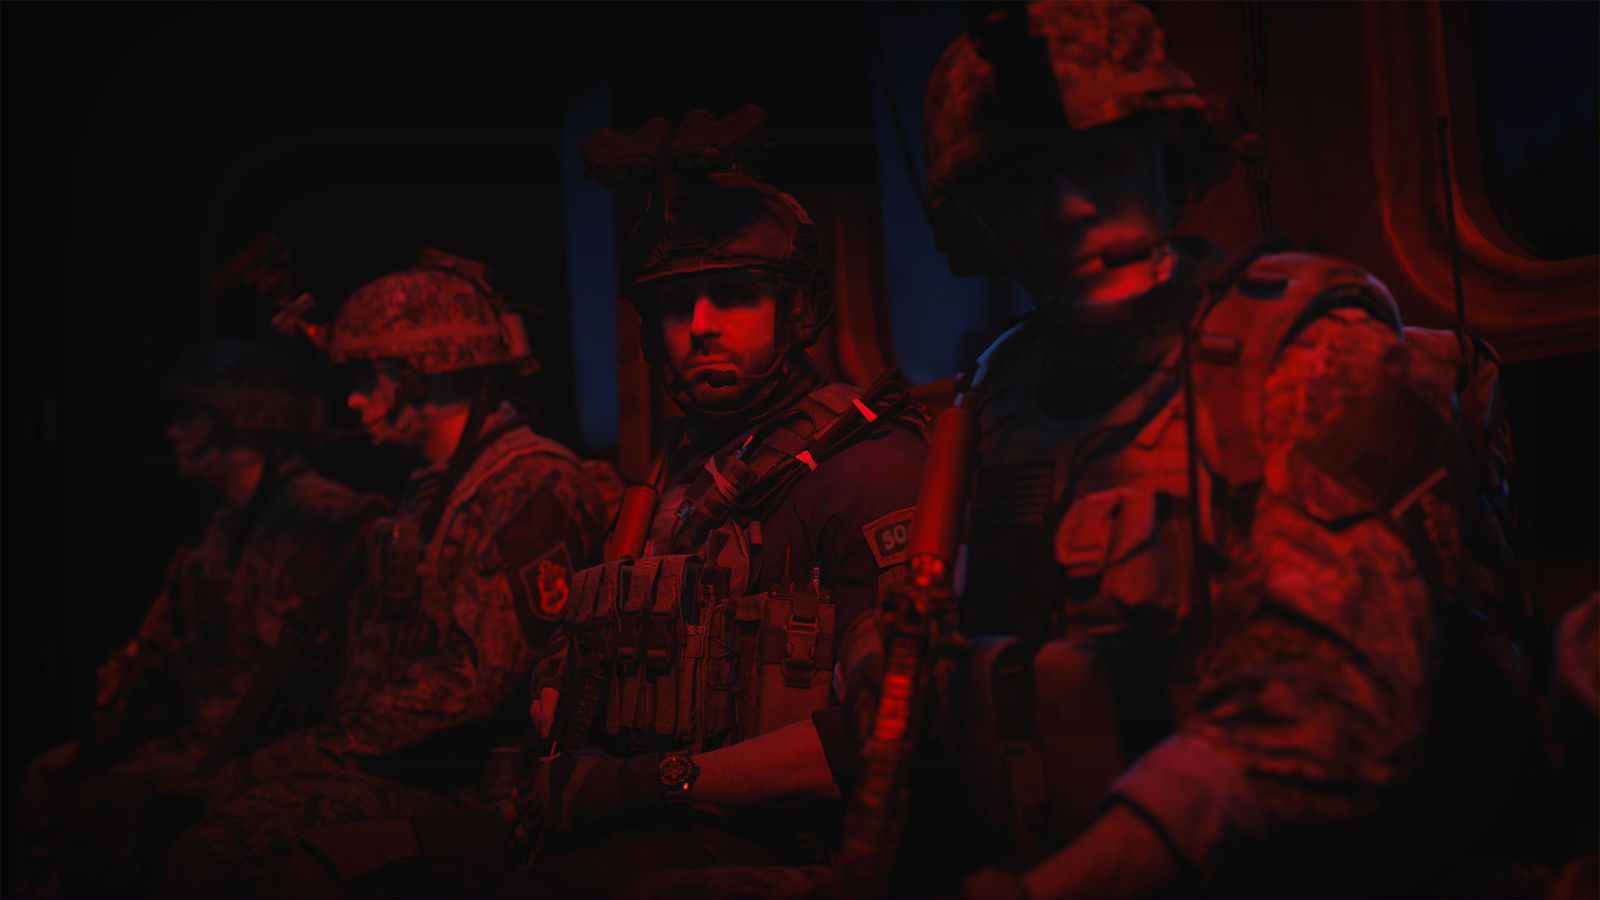 Soldiers bathed in red light, waiting to start a mission